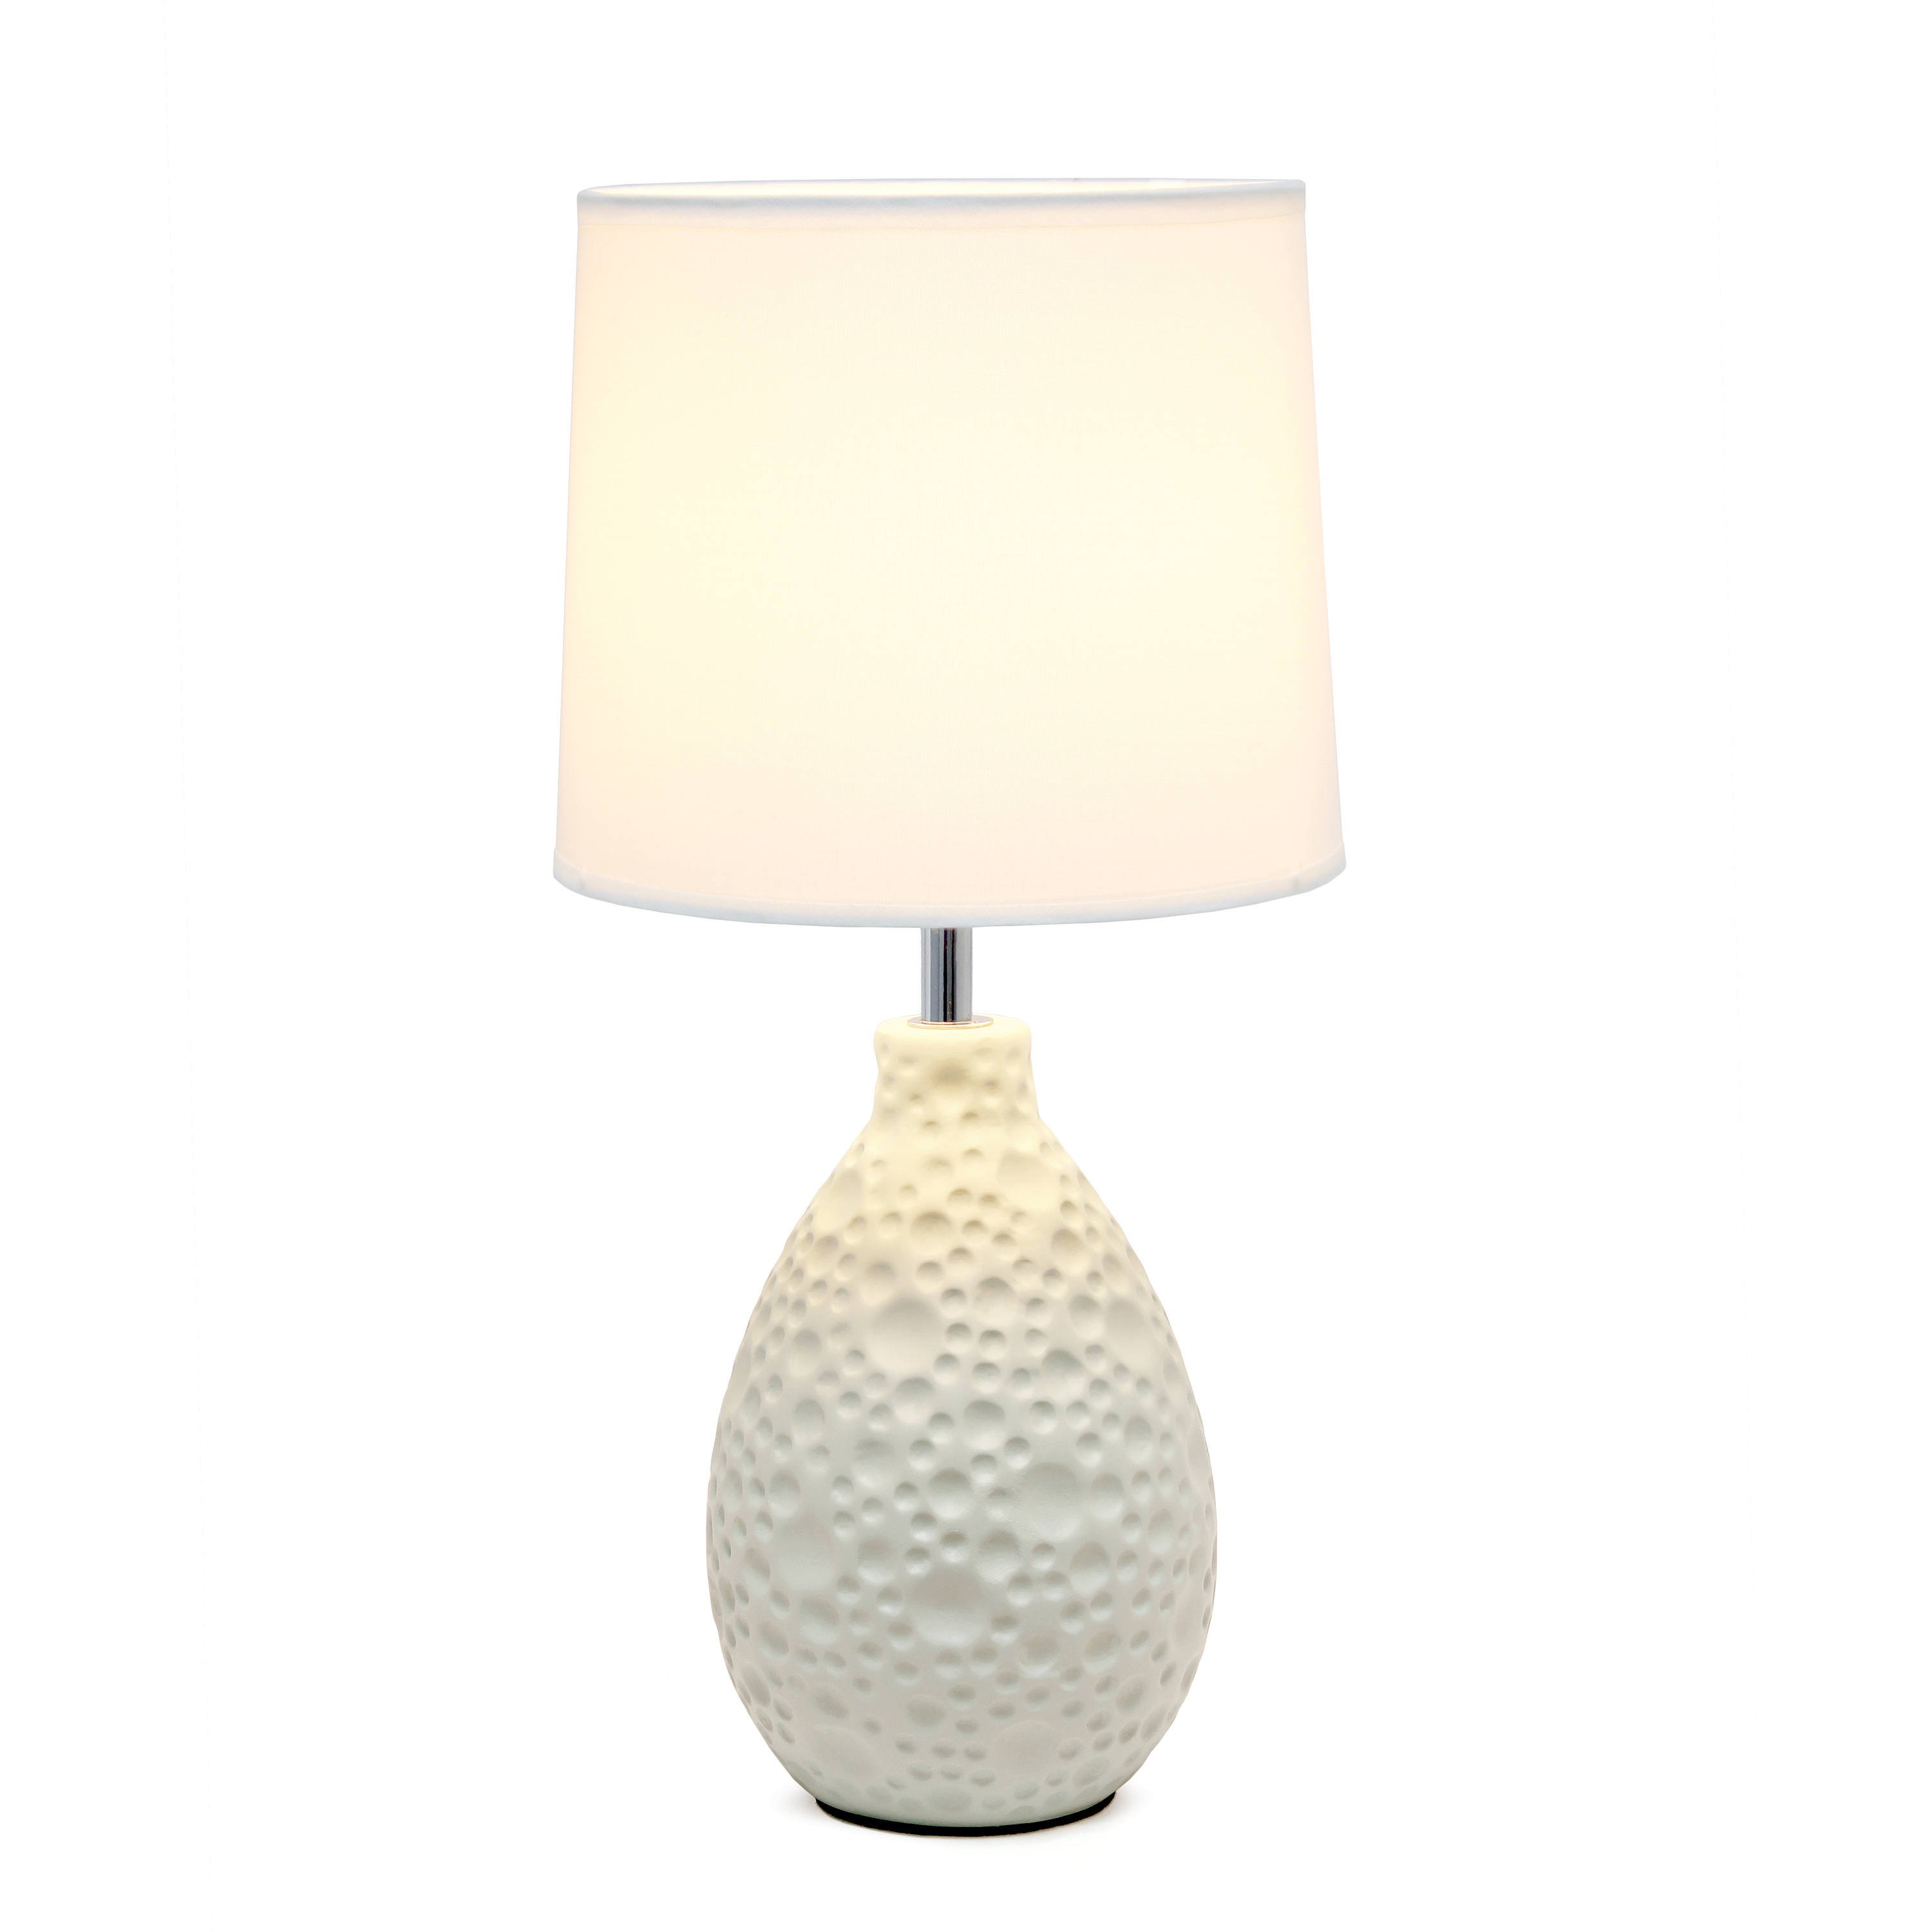 Simple Designs Textured Stucco Ceramic Oval Table Lamp - image 3 of 8